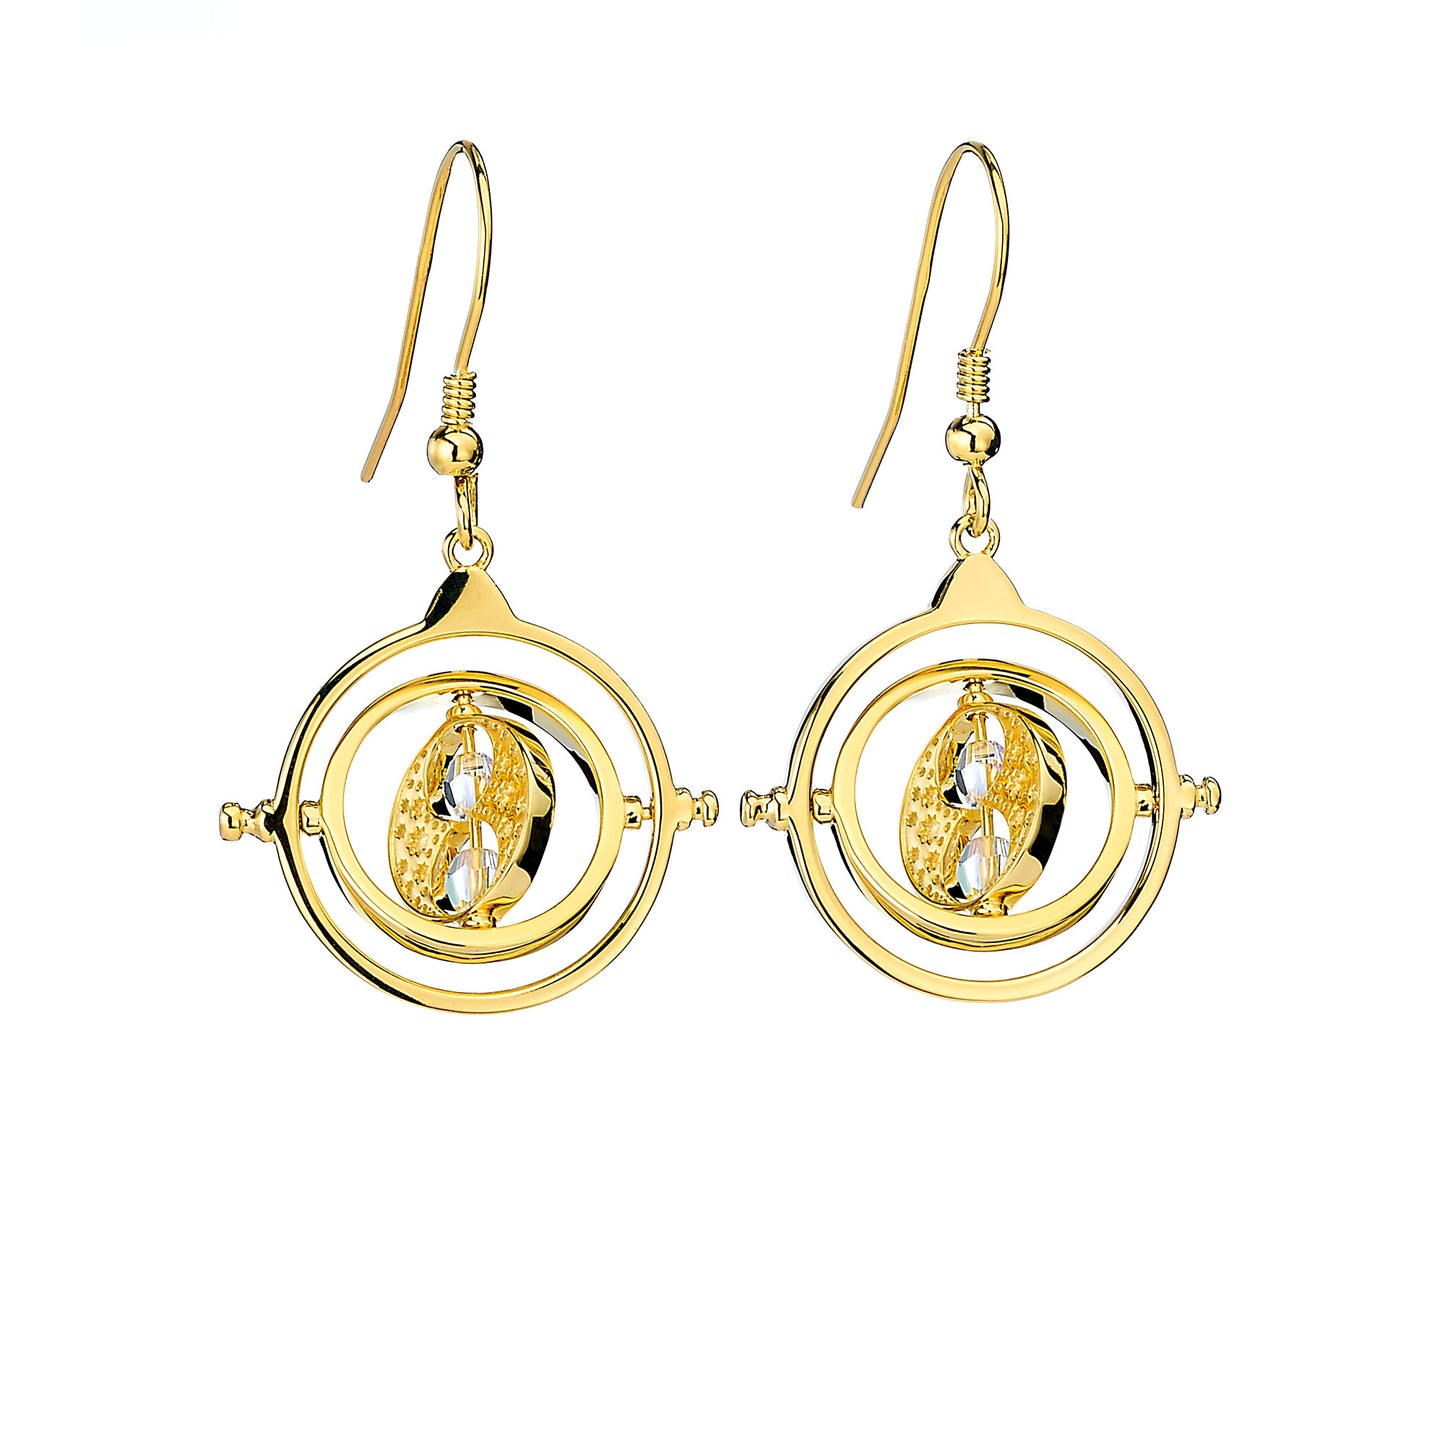 Harry Potter Time Turner Drop Earring Embellished with Crystals - Gold Plated Sterling Silver